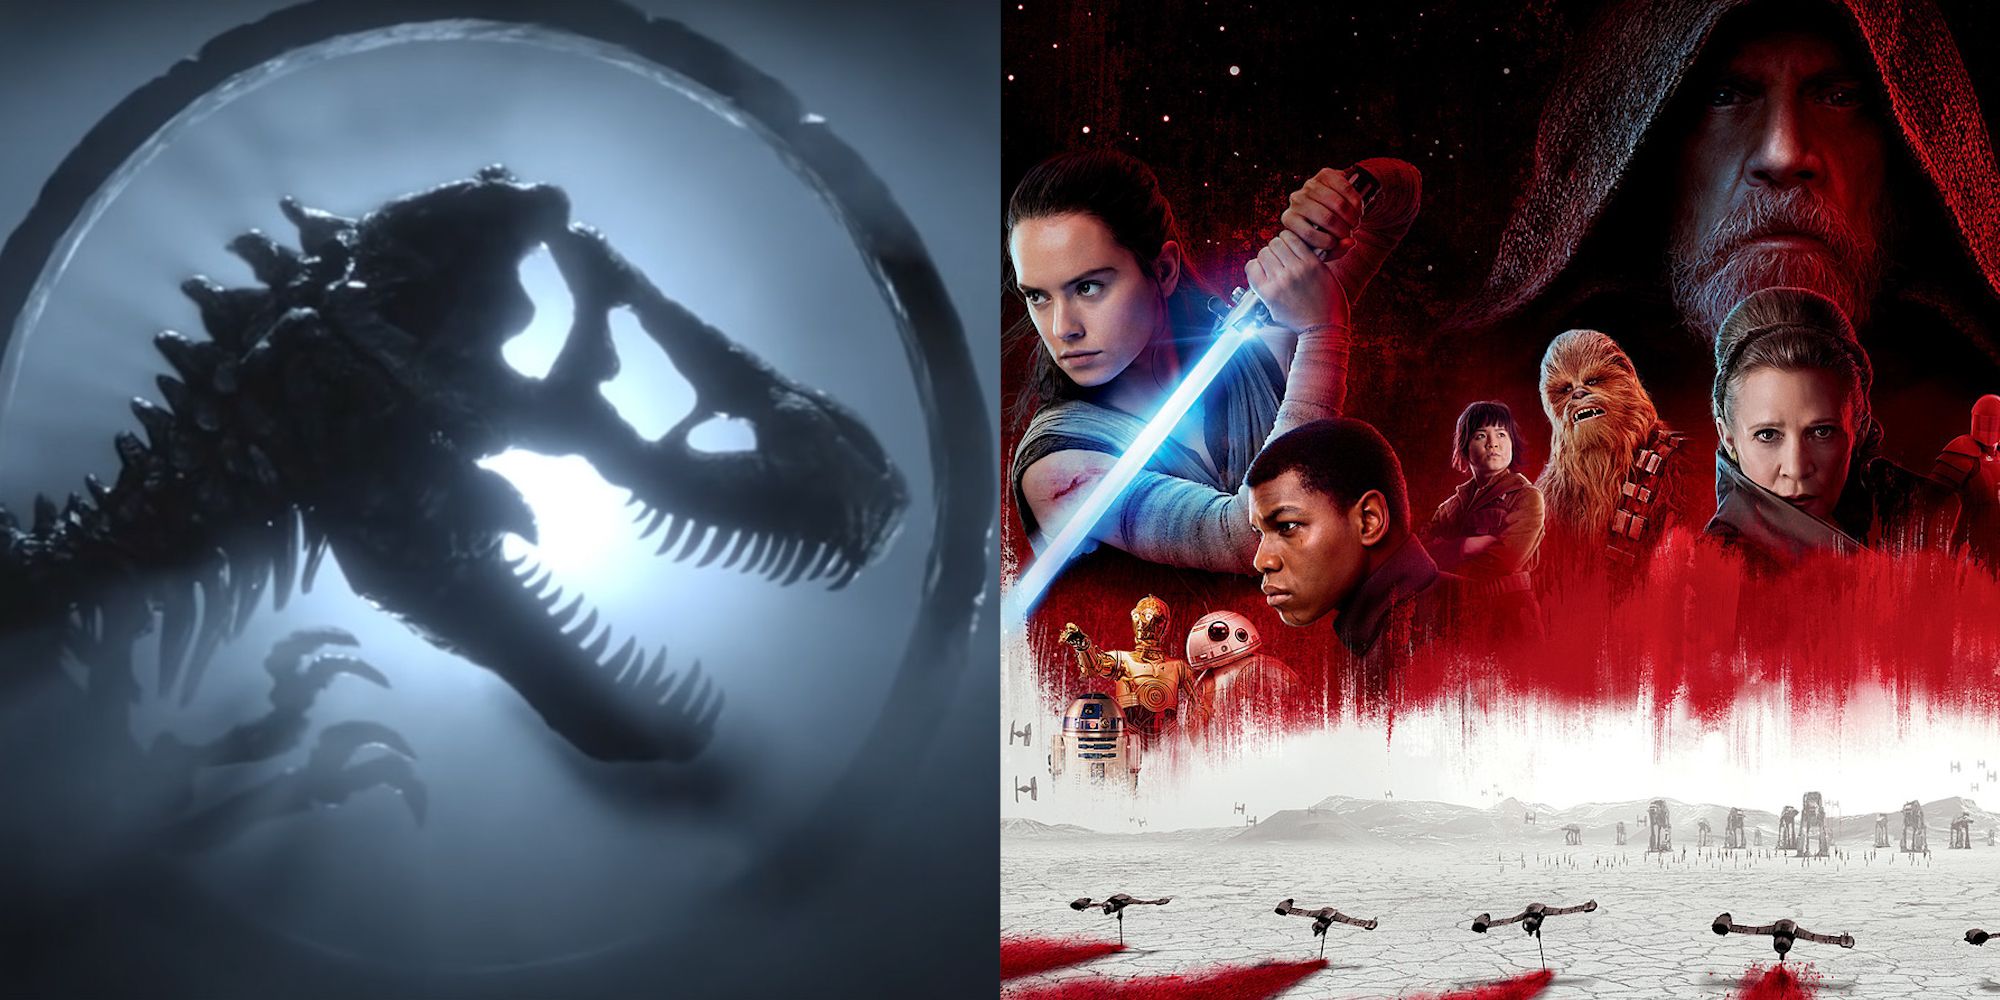 10 Highest Grossing Sci-Fi Movies of the Last 10 Years